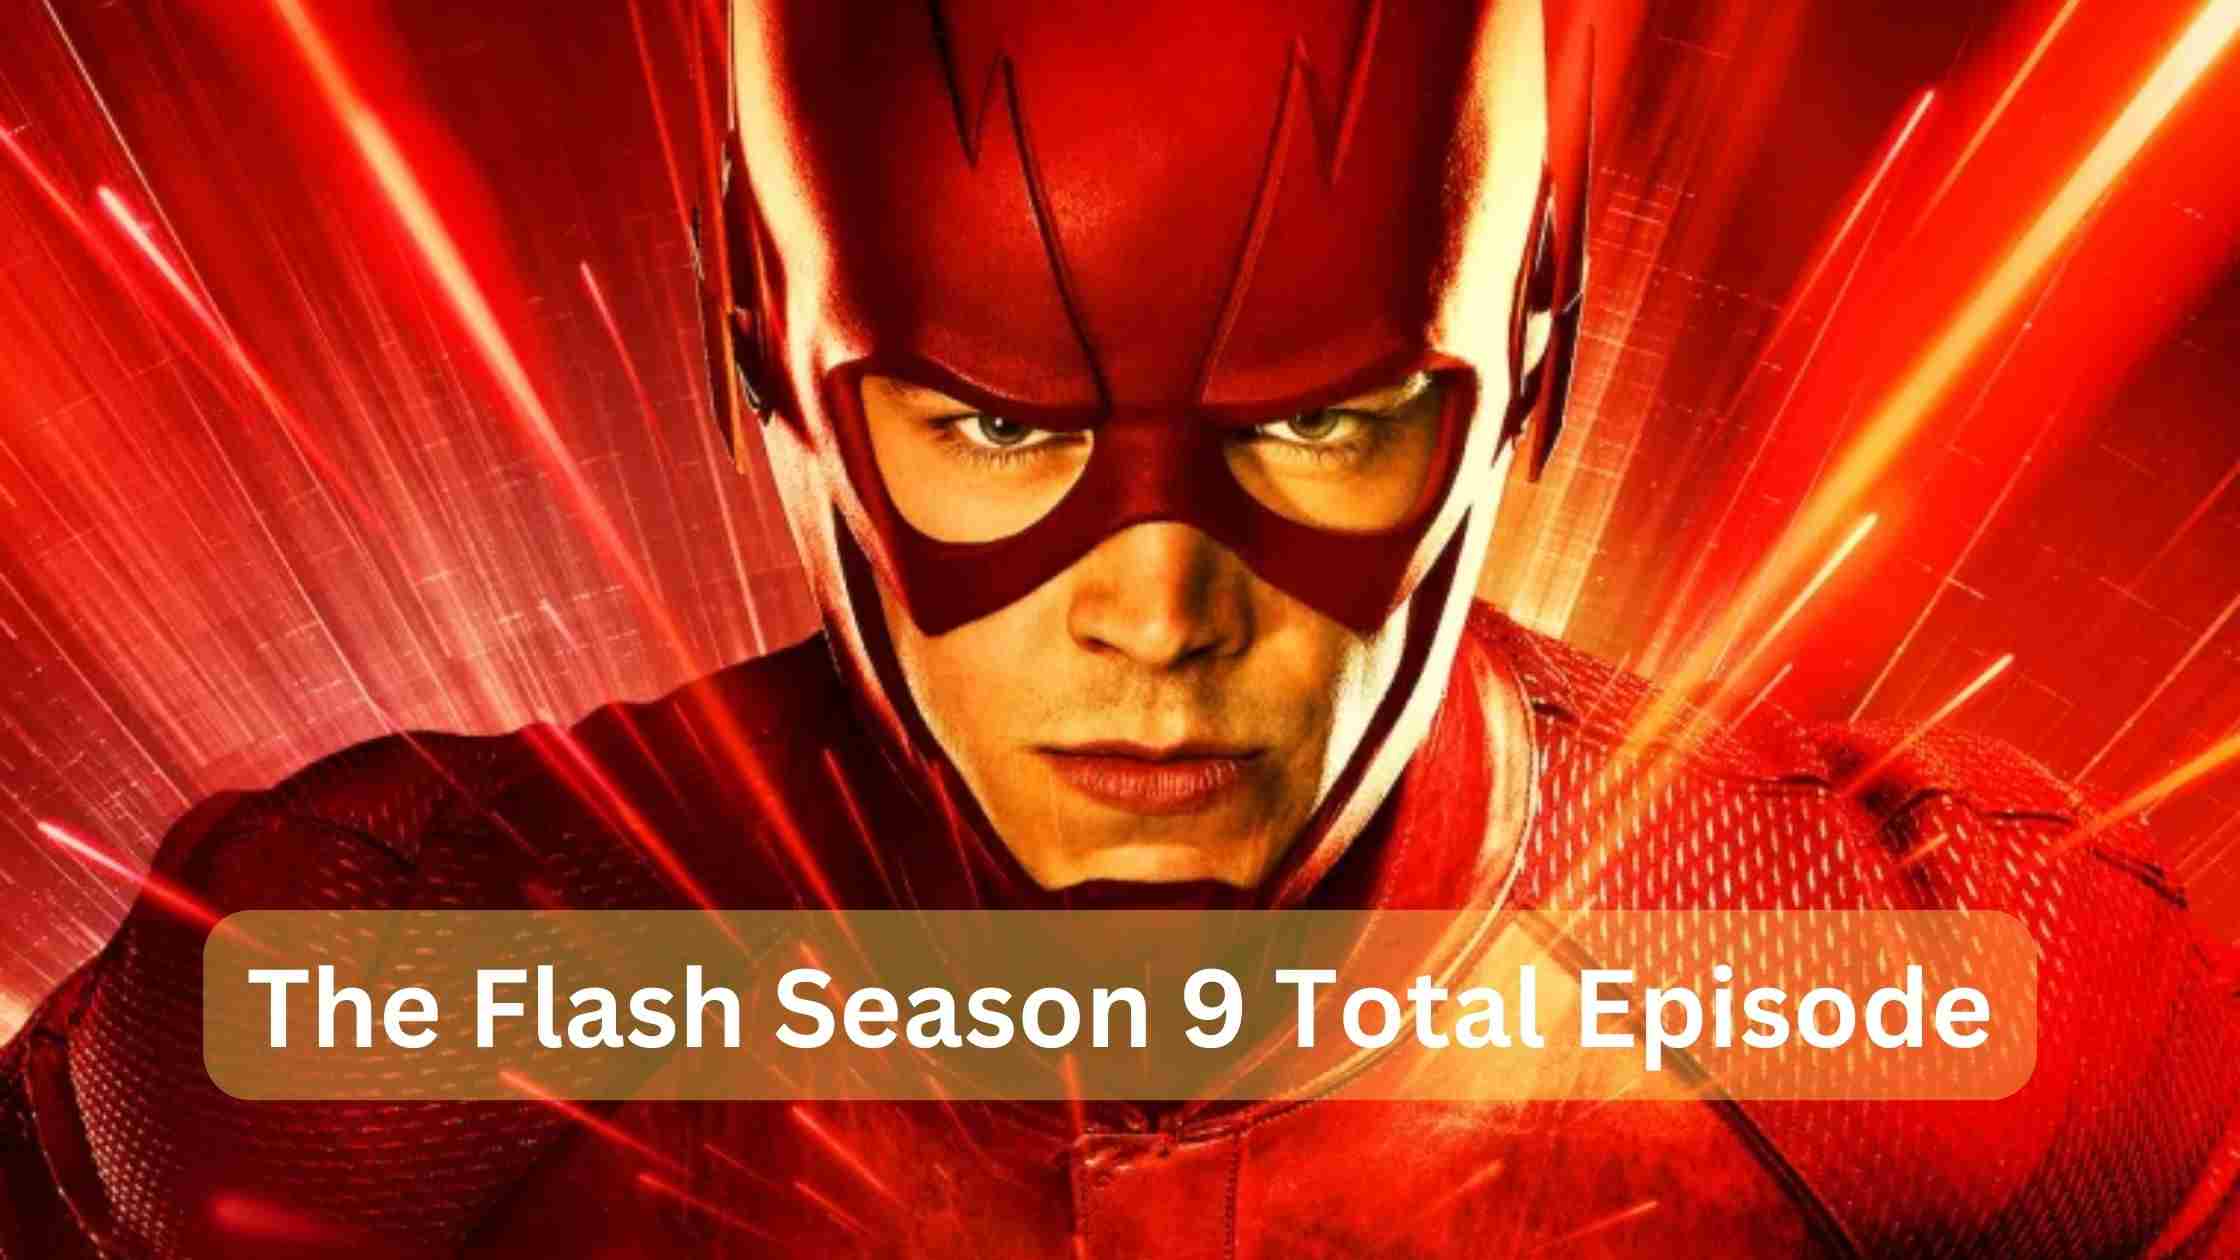 The Flash Season 9 Total Episode, and Release Date